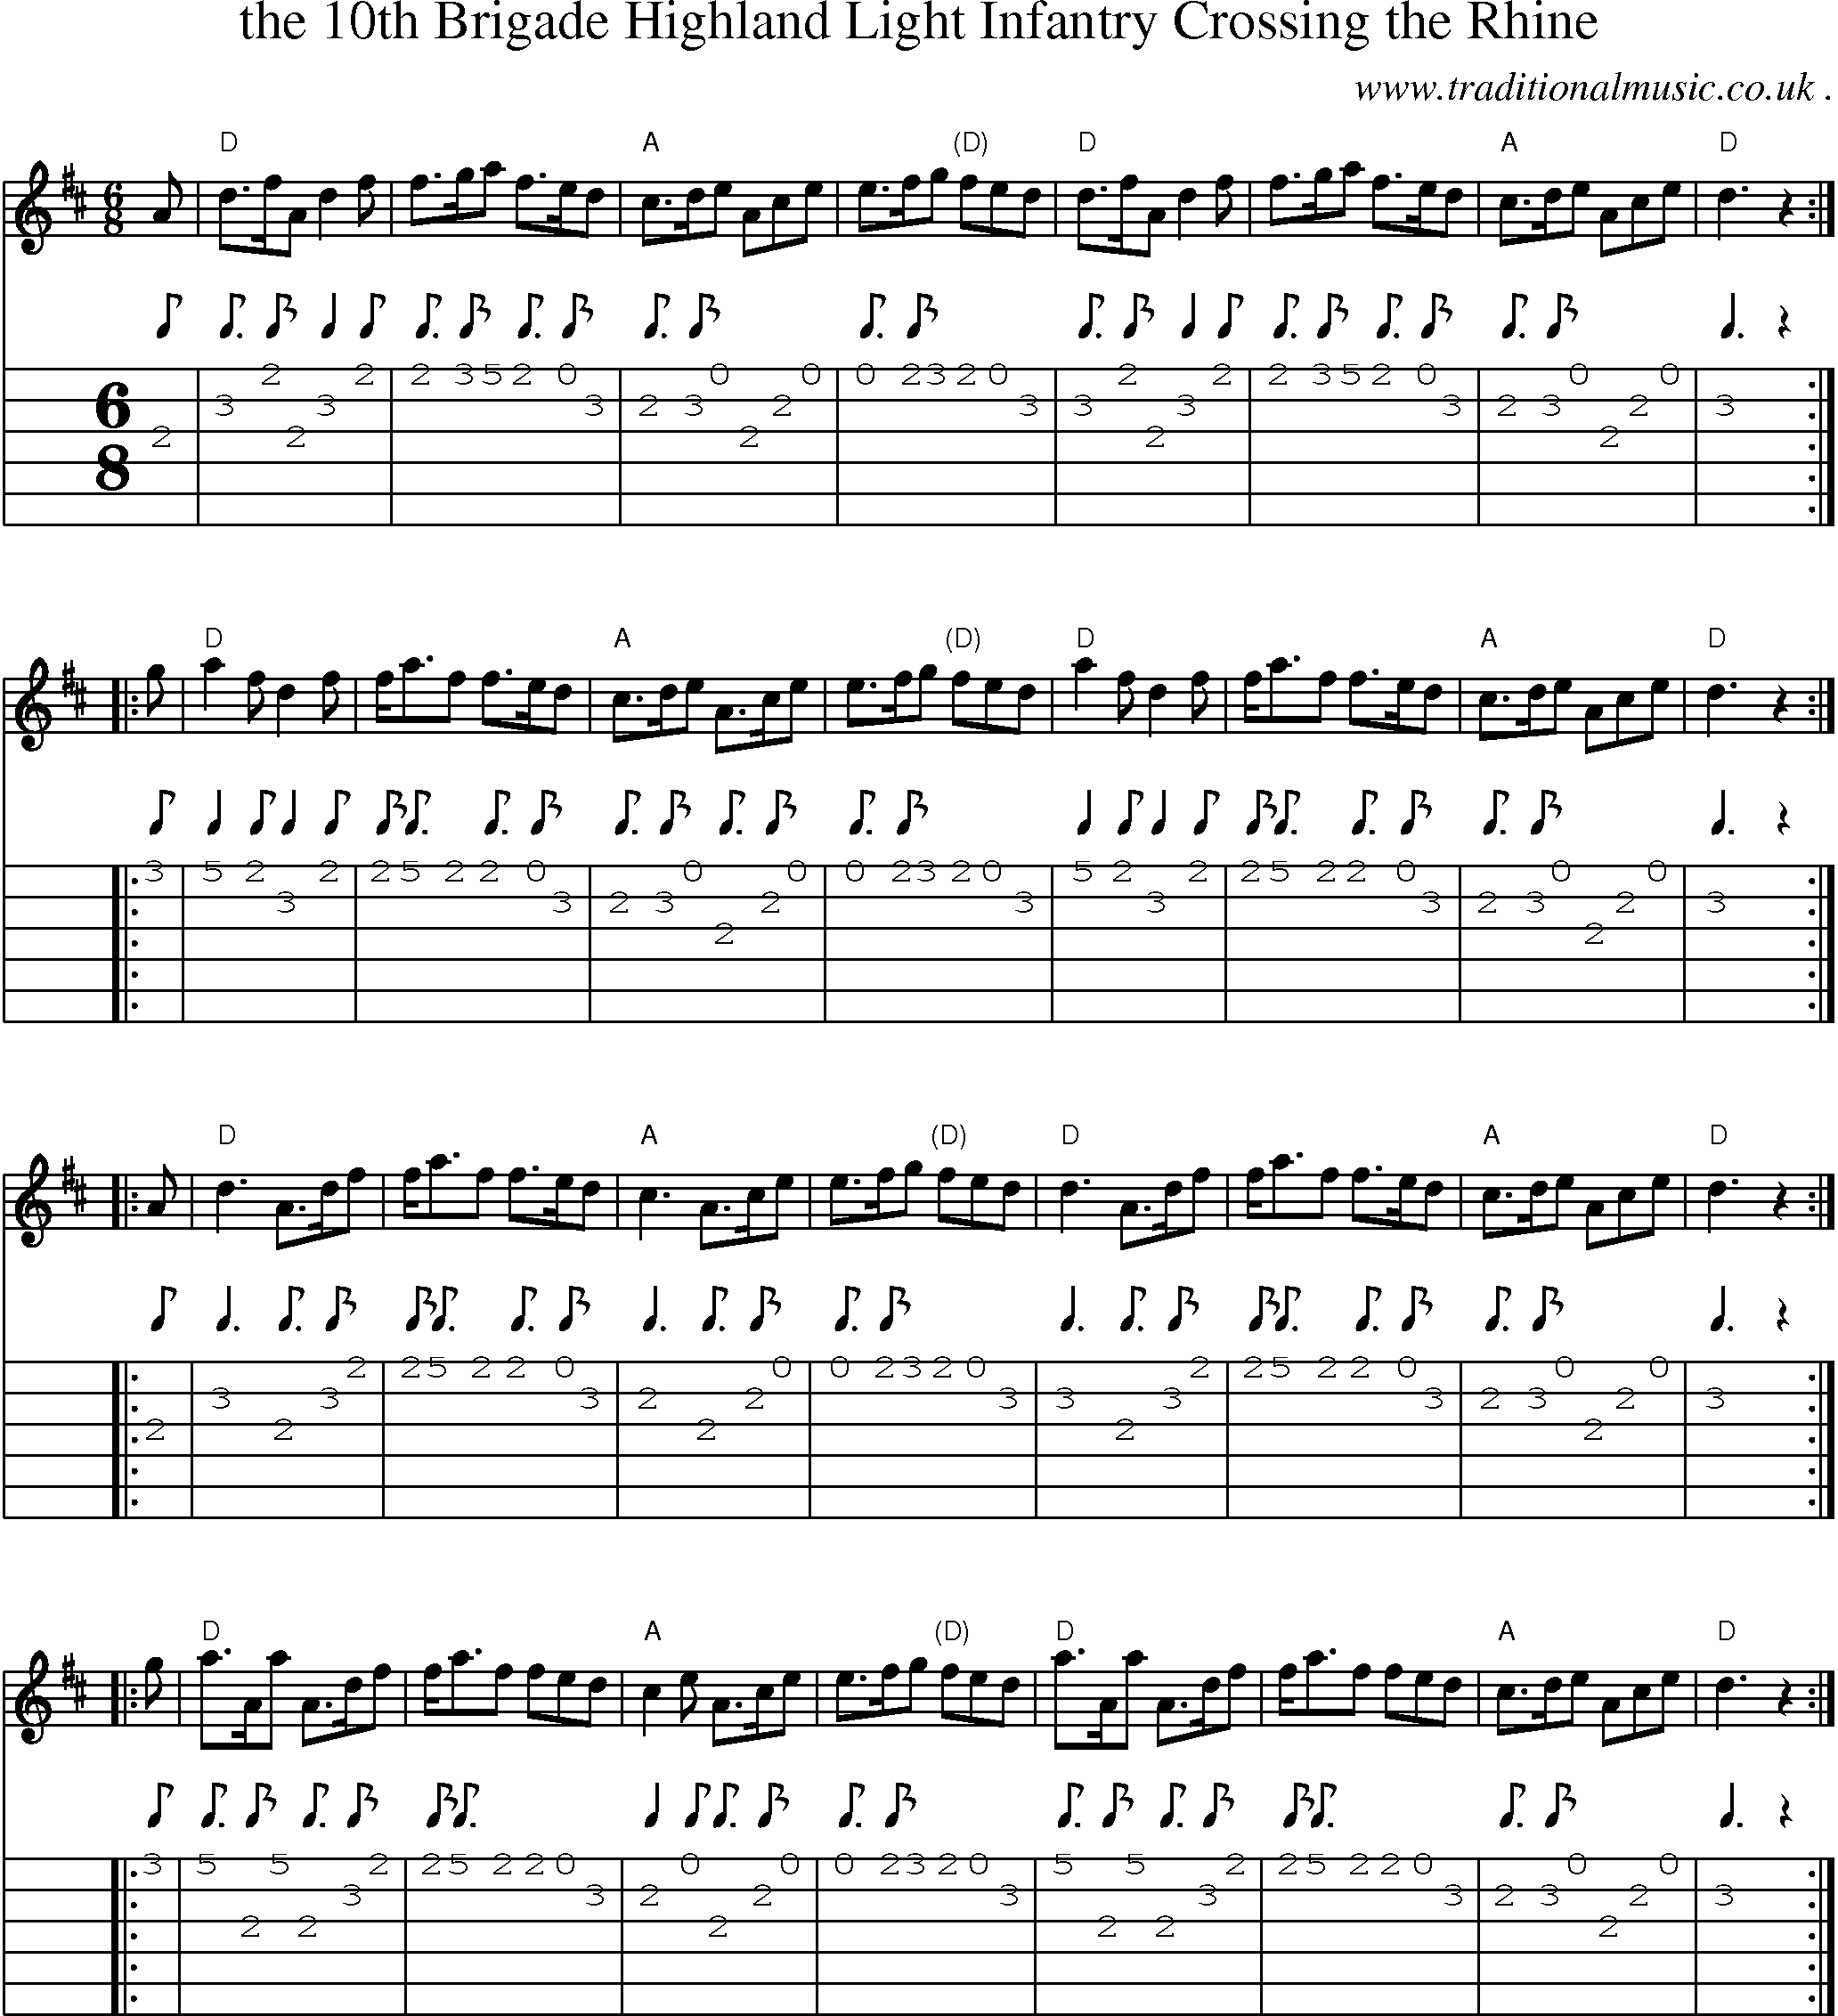 Sheet-music  score, Chords and Guitar Tabs for The 10th Brigade Highland Light Infantry Crossing The Rhine